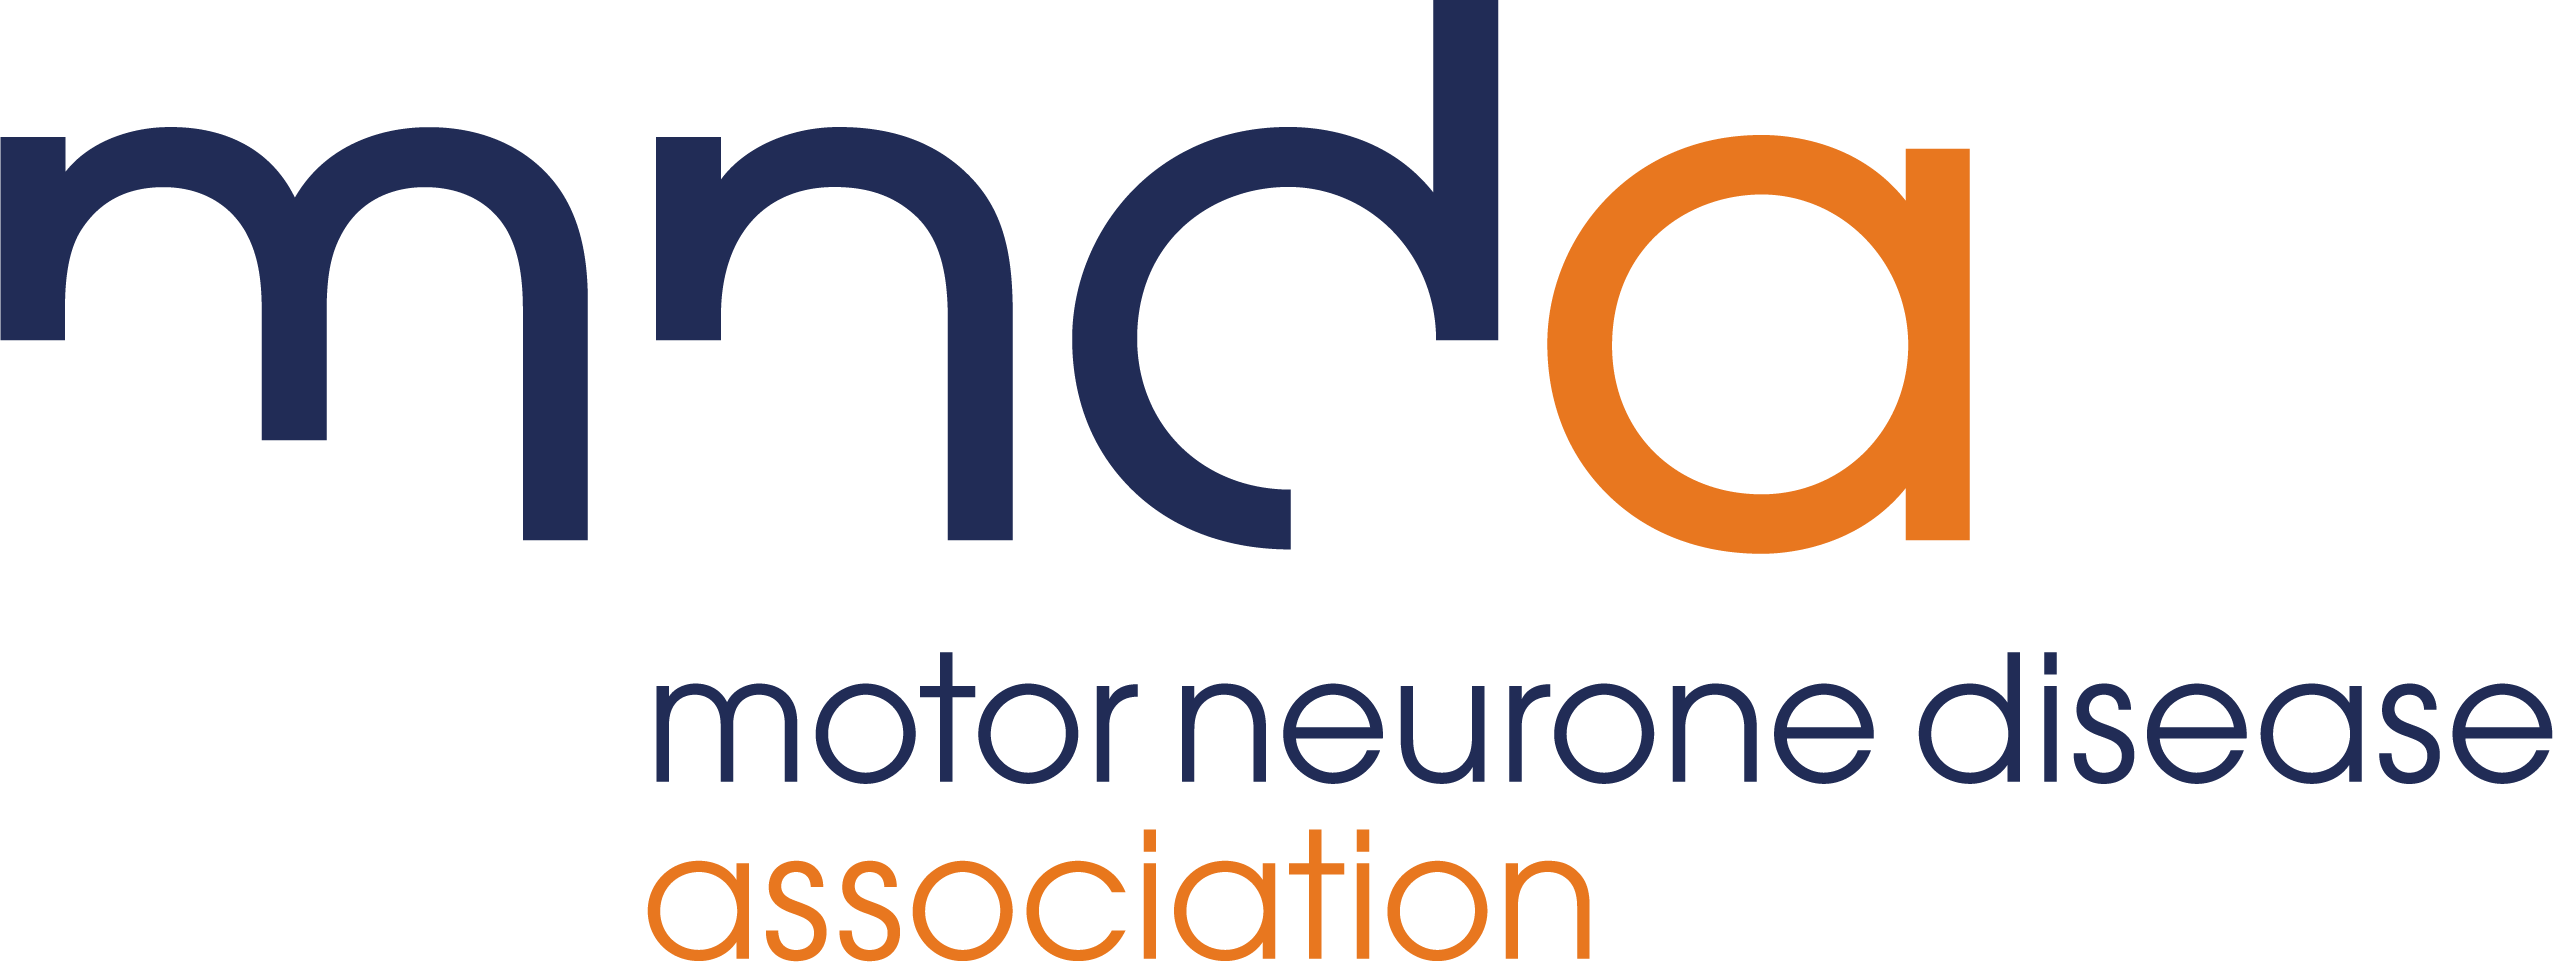 Find out more about the latest MND research news and more opportunities to get involved in research.  Click here to visit the motor neuron disease association (this link will open new tab)